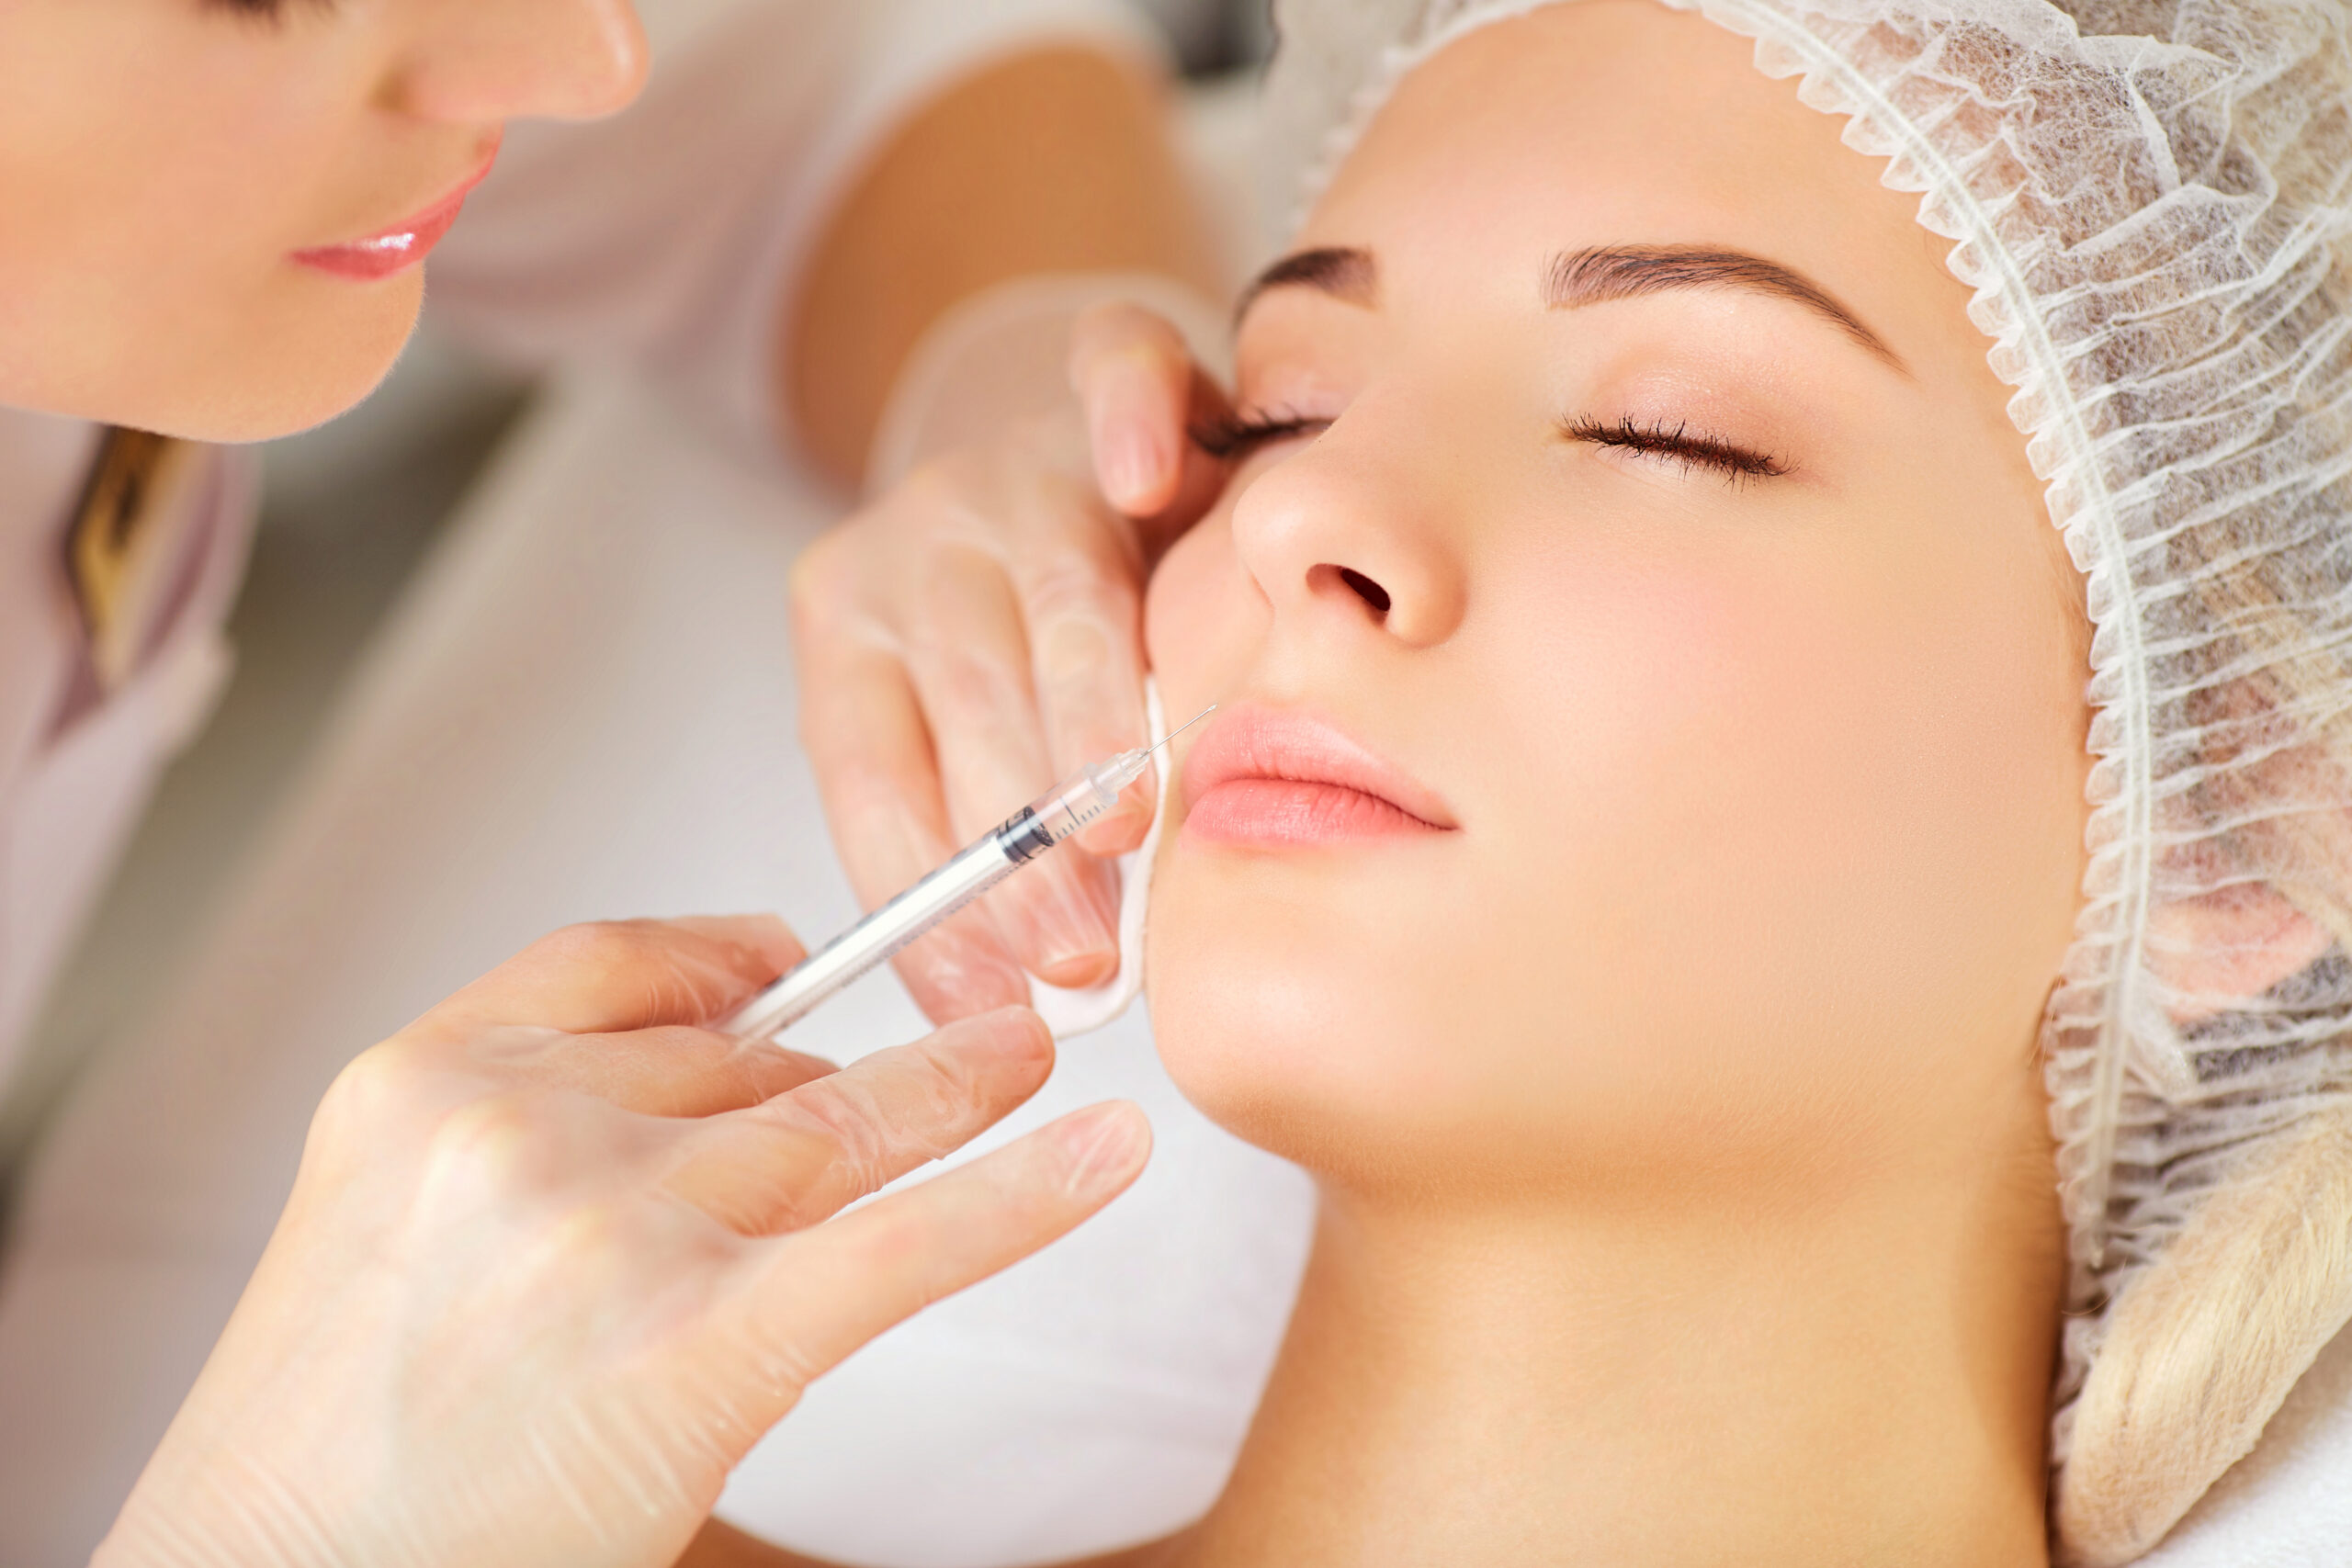 South Florida Medical Group | Filler & Botox Injections in Miami